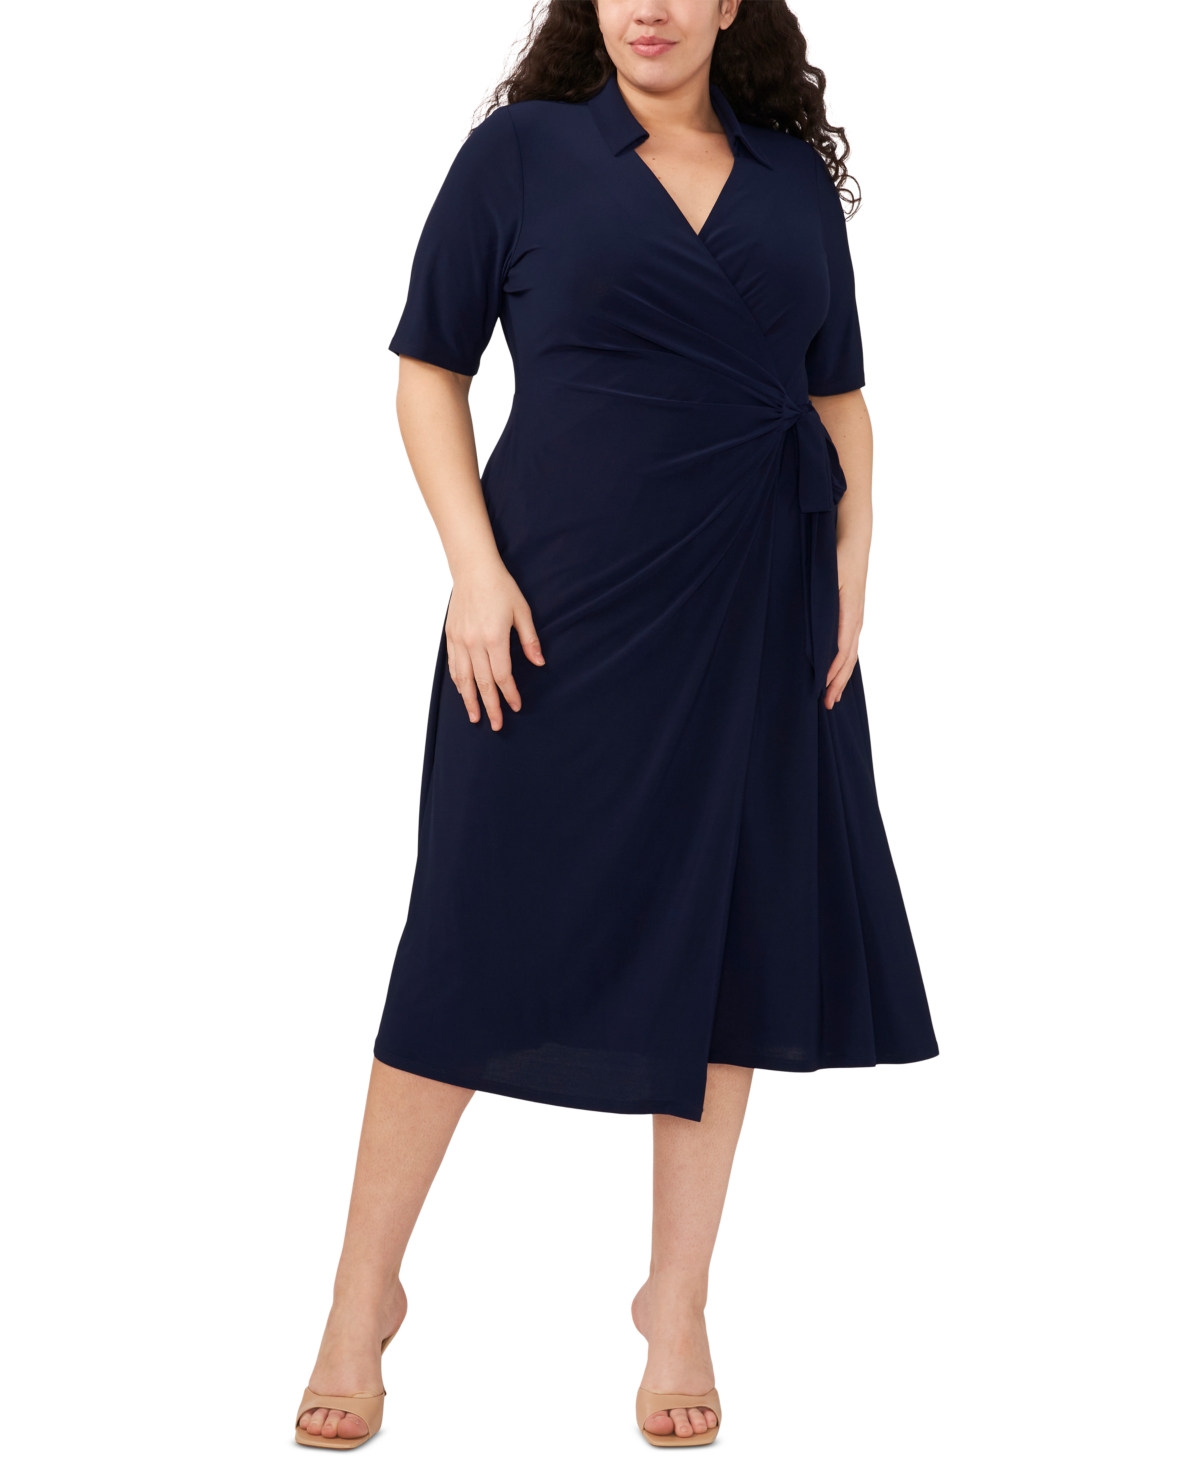 Msk Plus Size Collared Wrap Dress In Navy